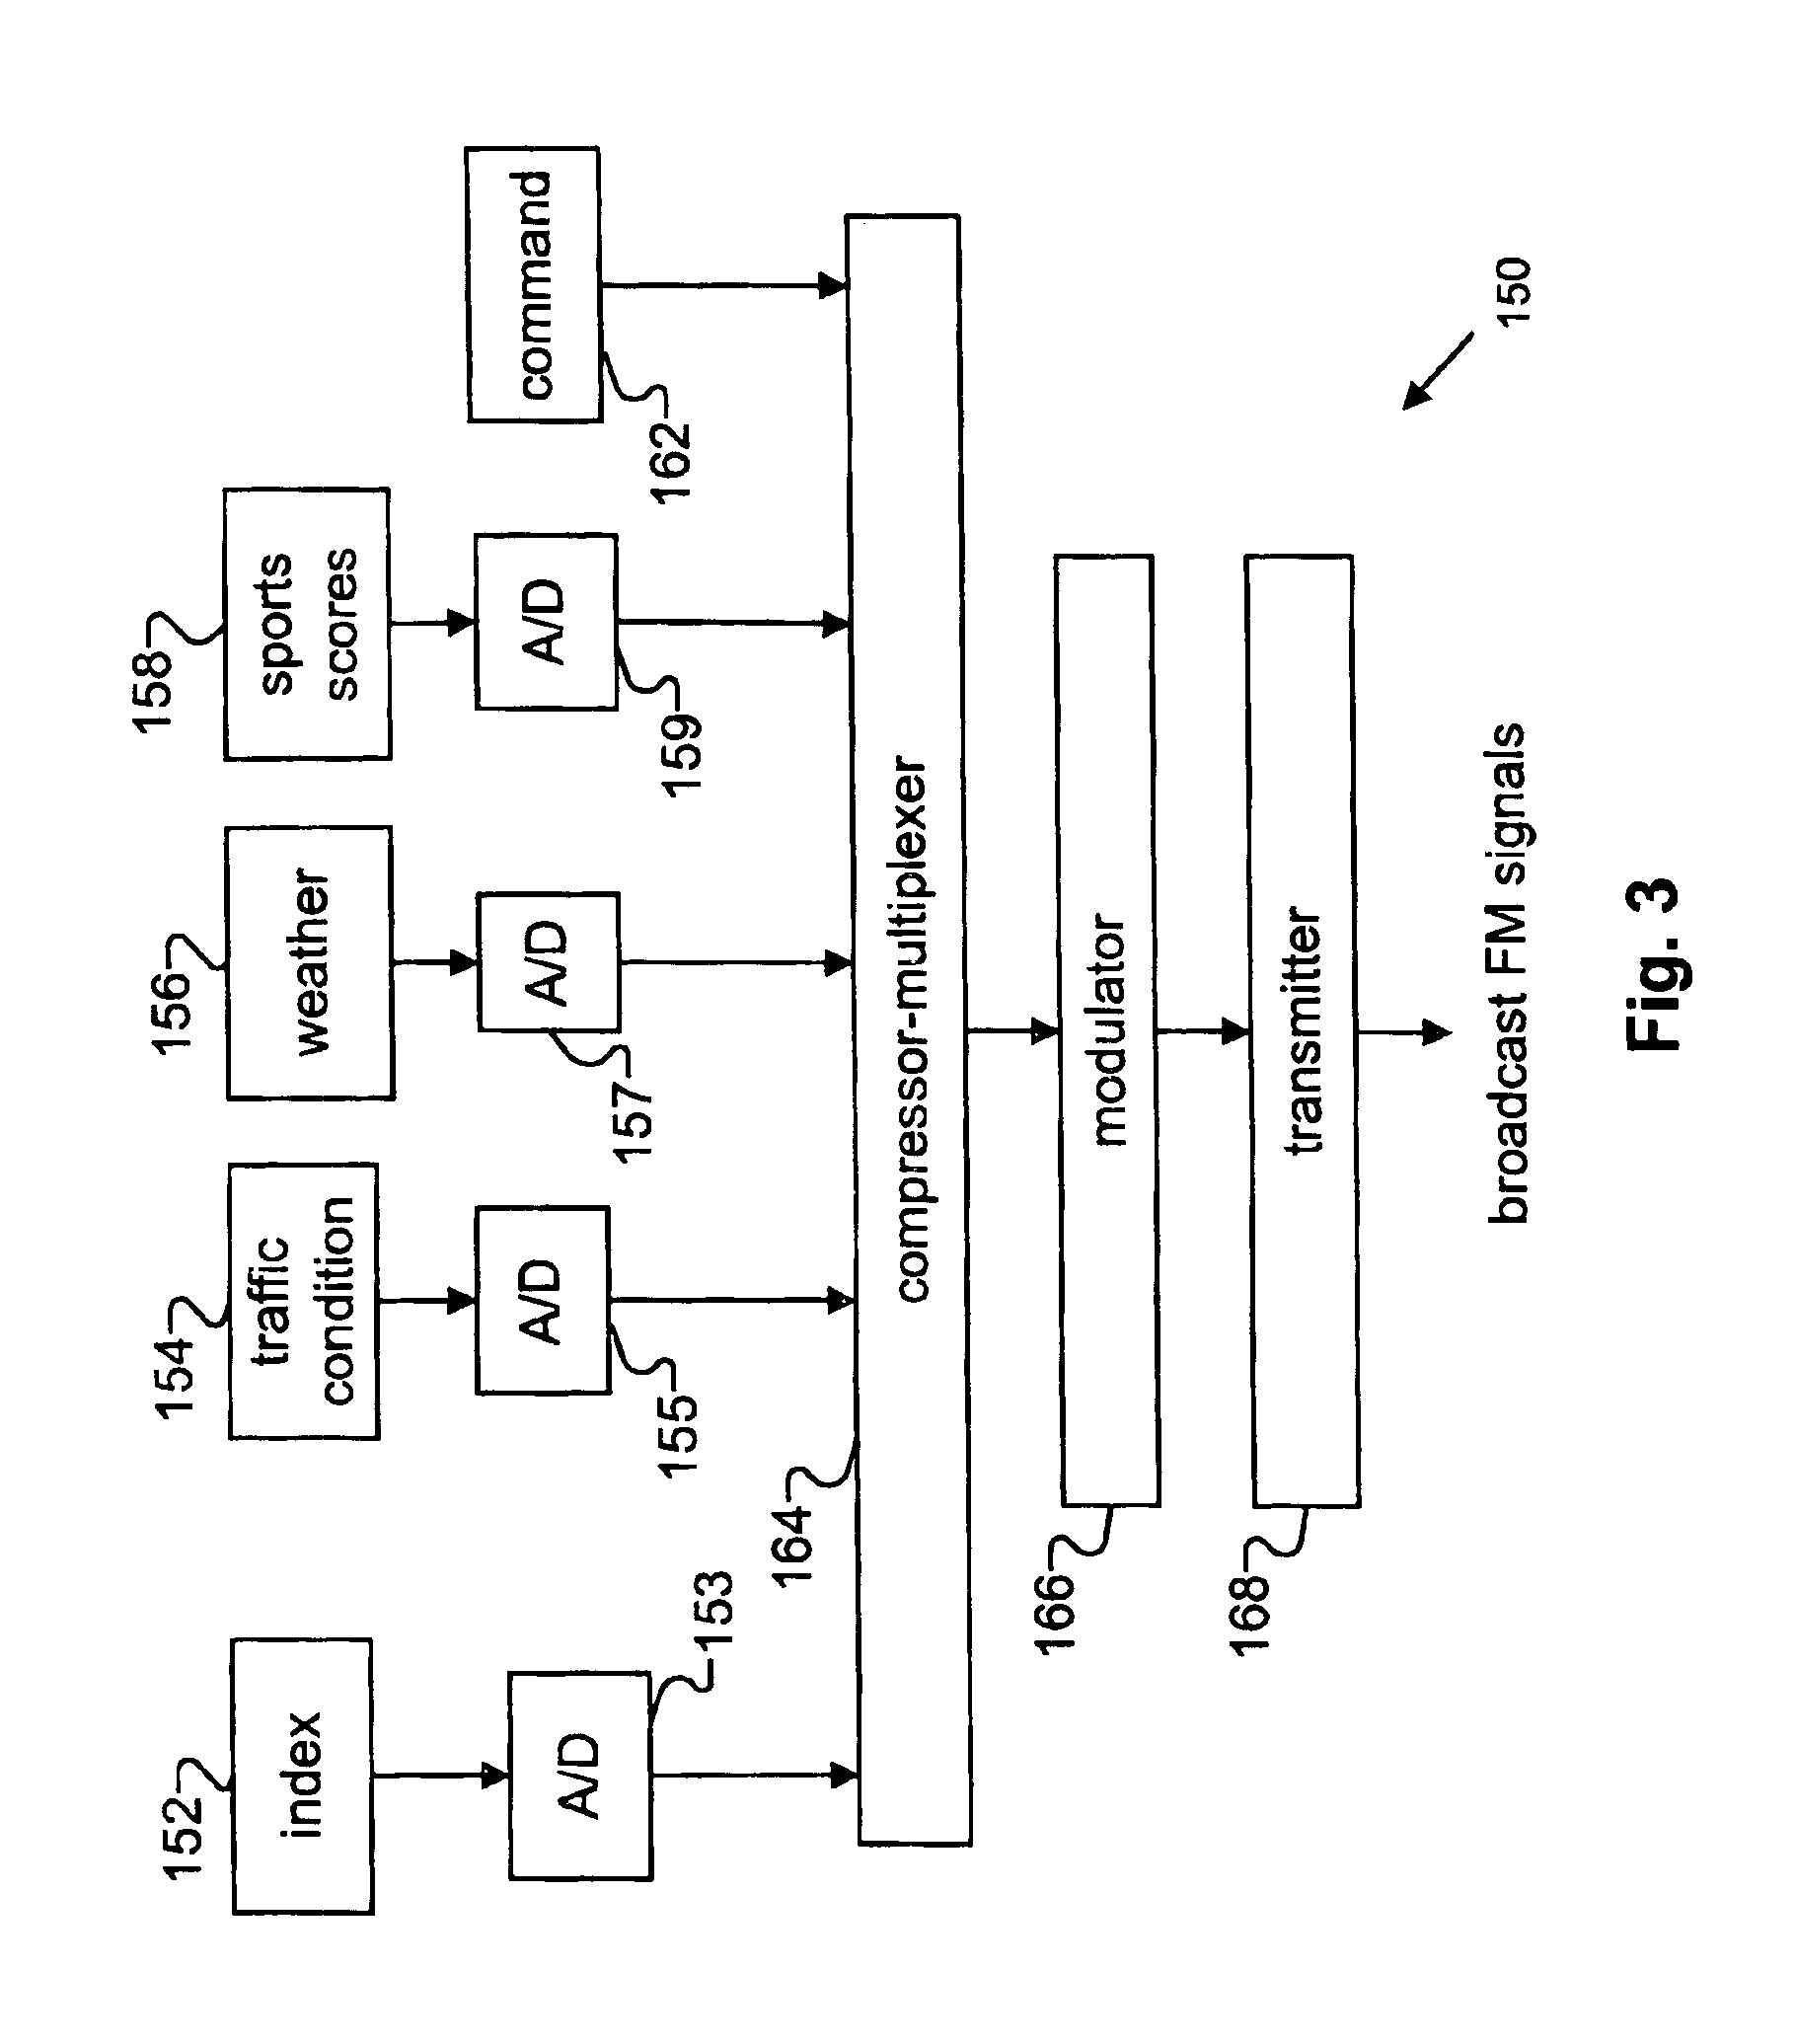 Radio receiver for processing digital and analog audio signals